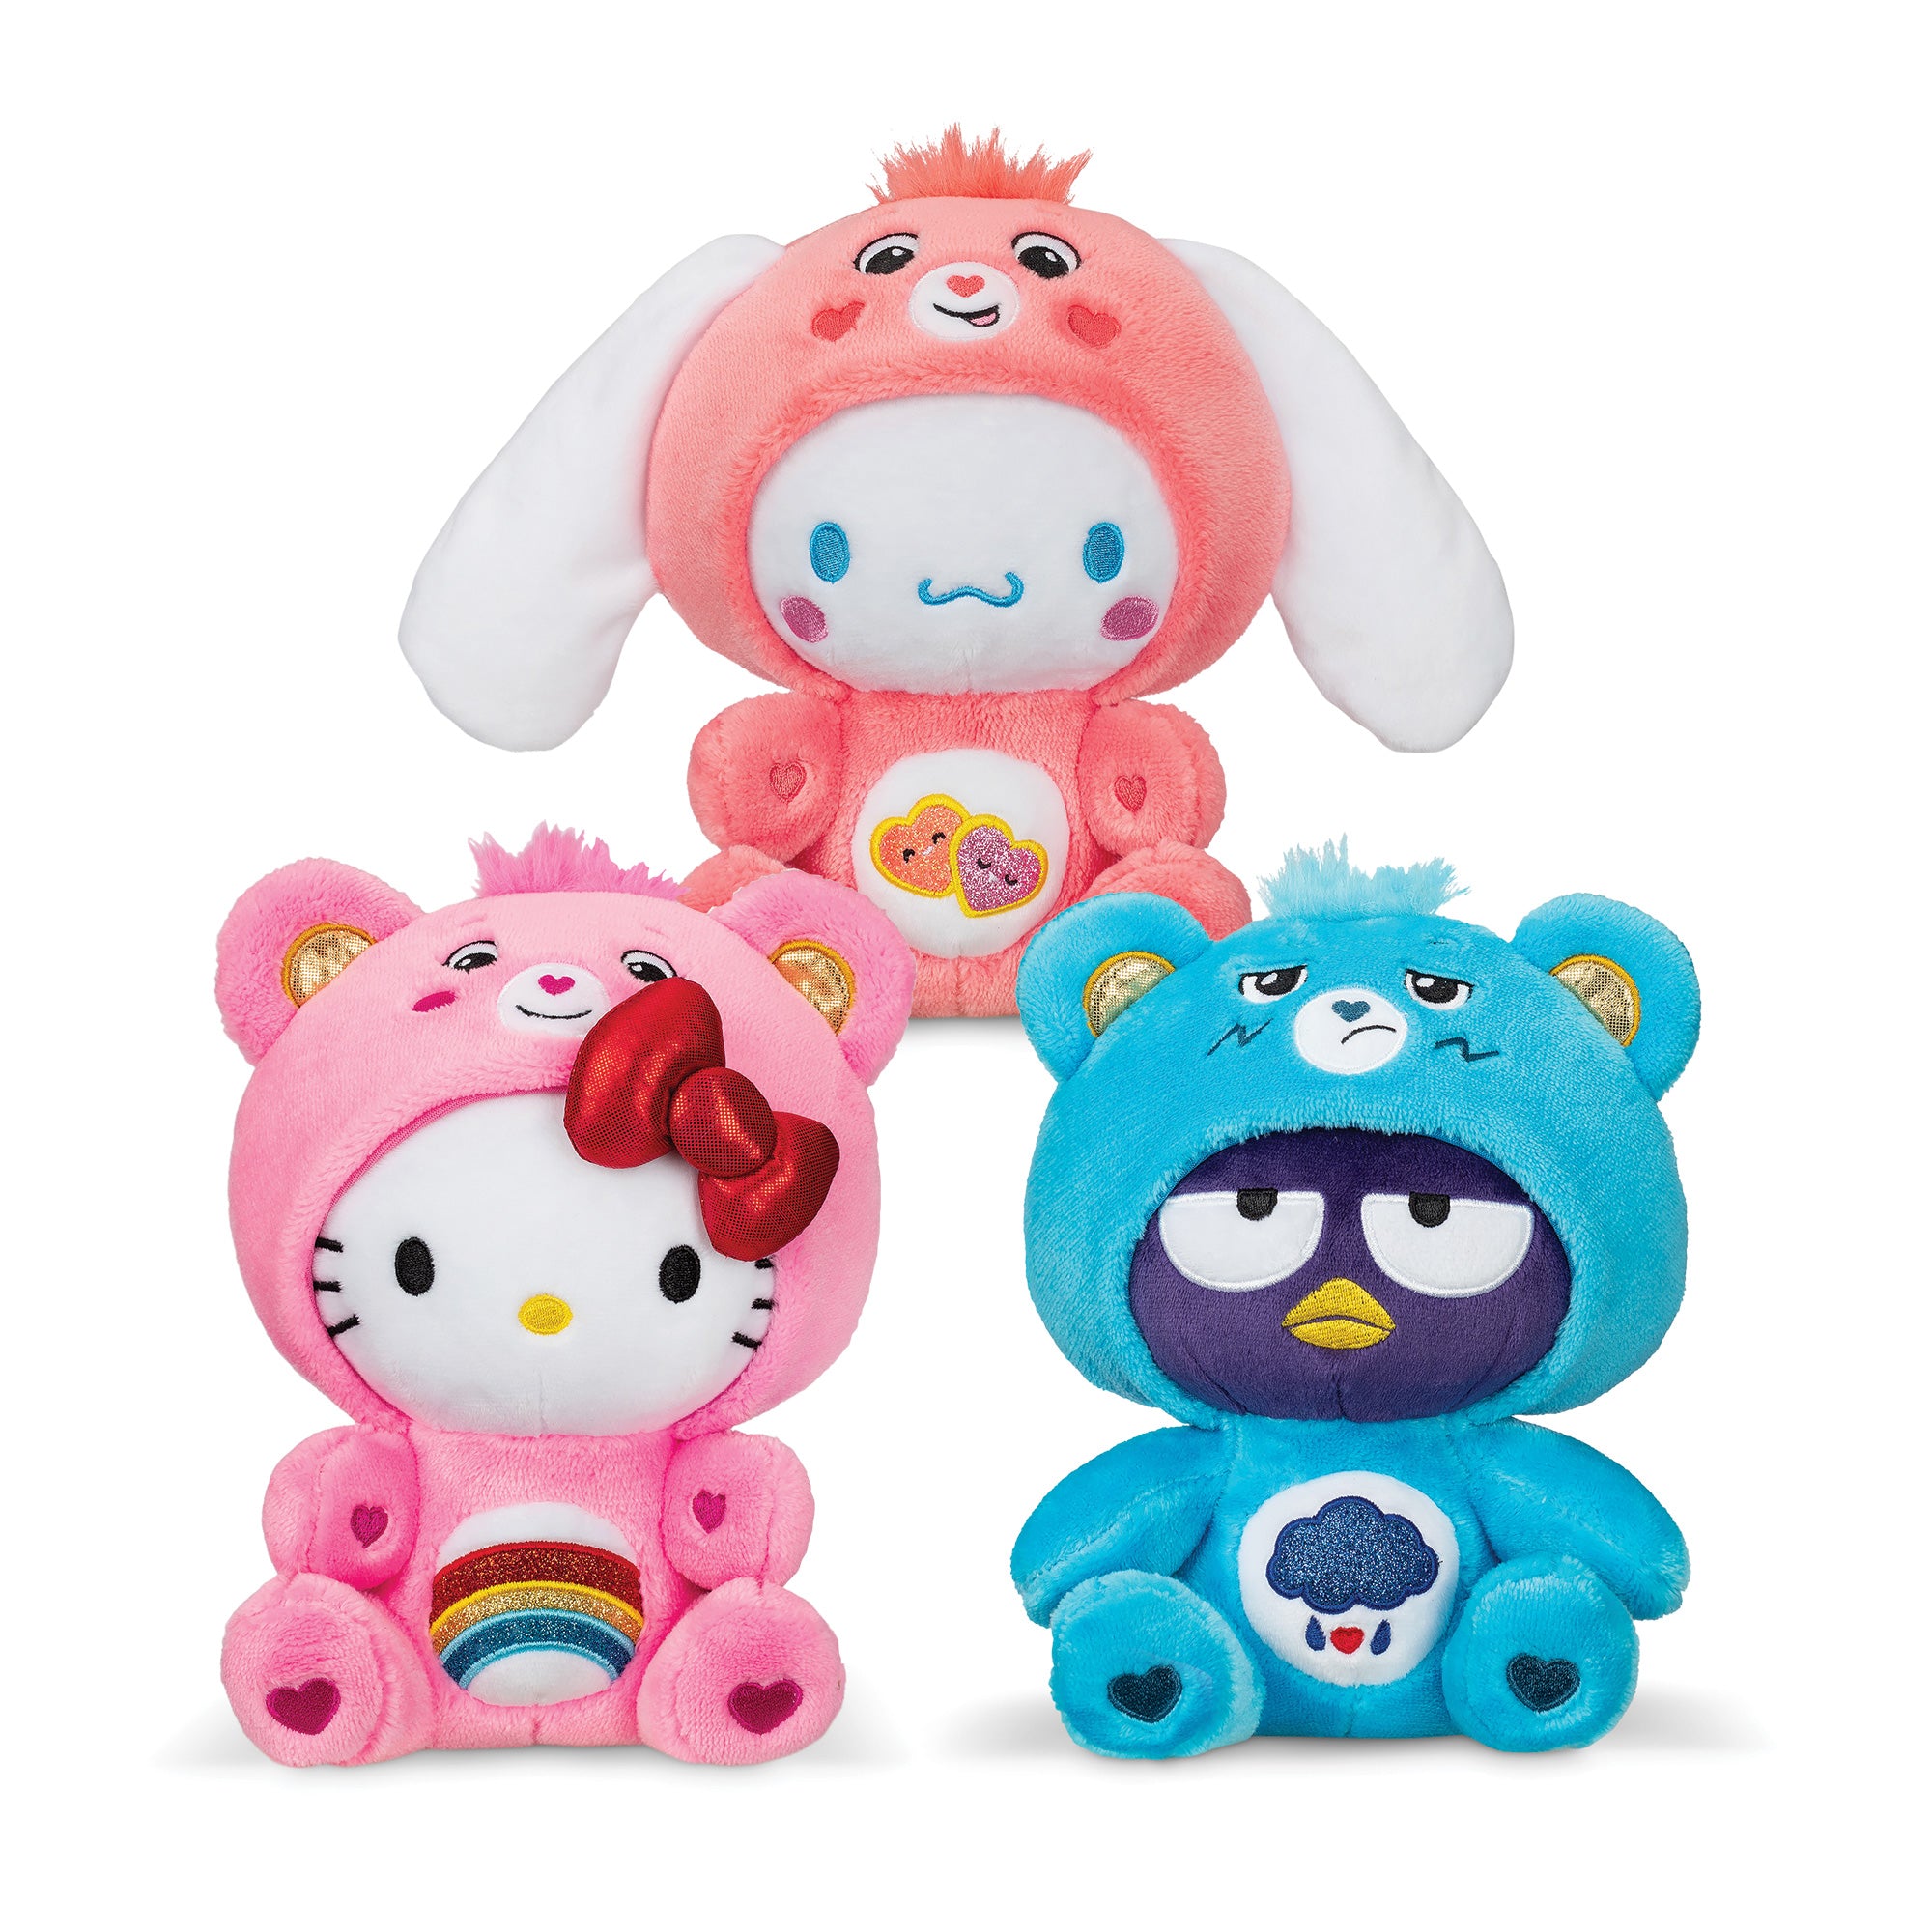 Hello Kitty & Care Bear Mash-Up: Cinnamoroll & Love-A-Lot Bear by Schylling #22702